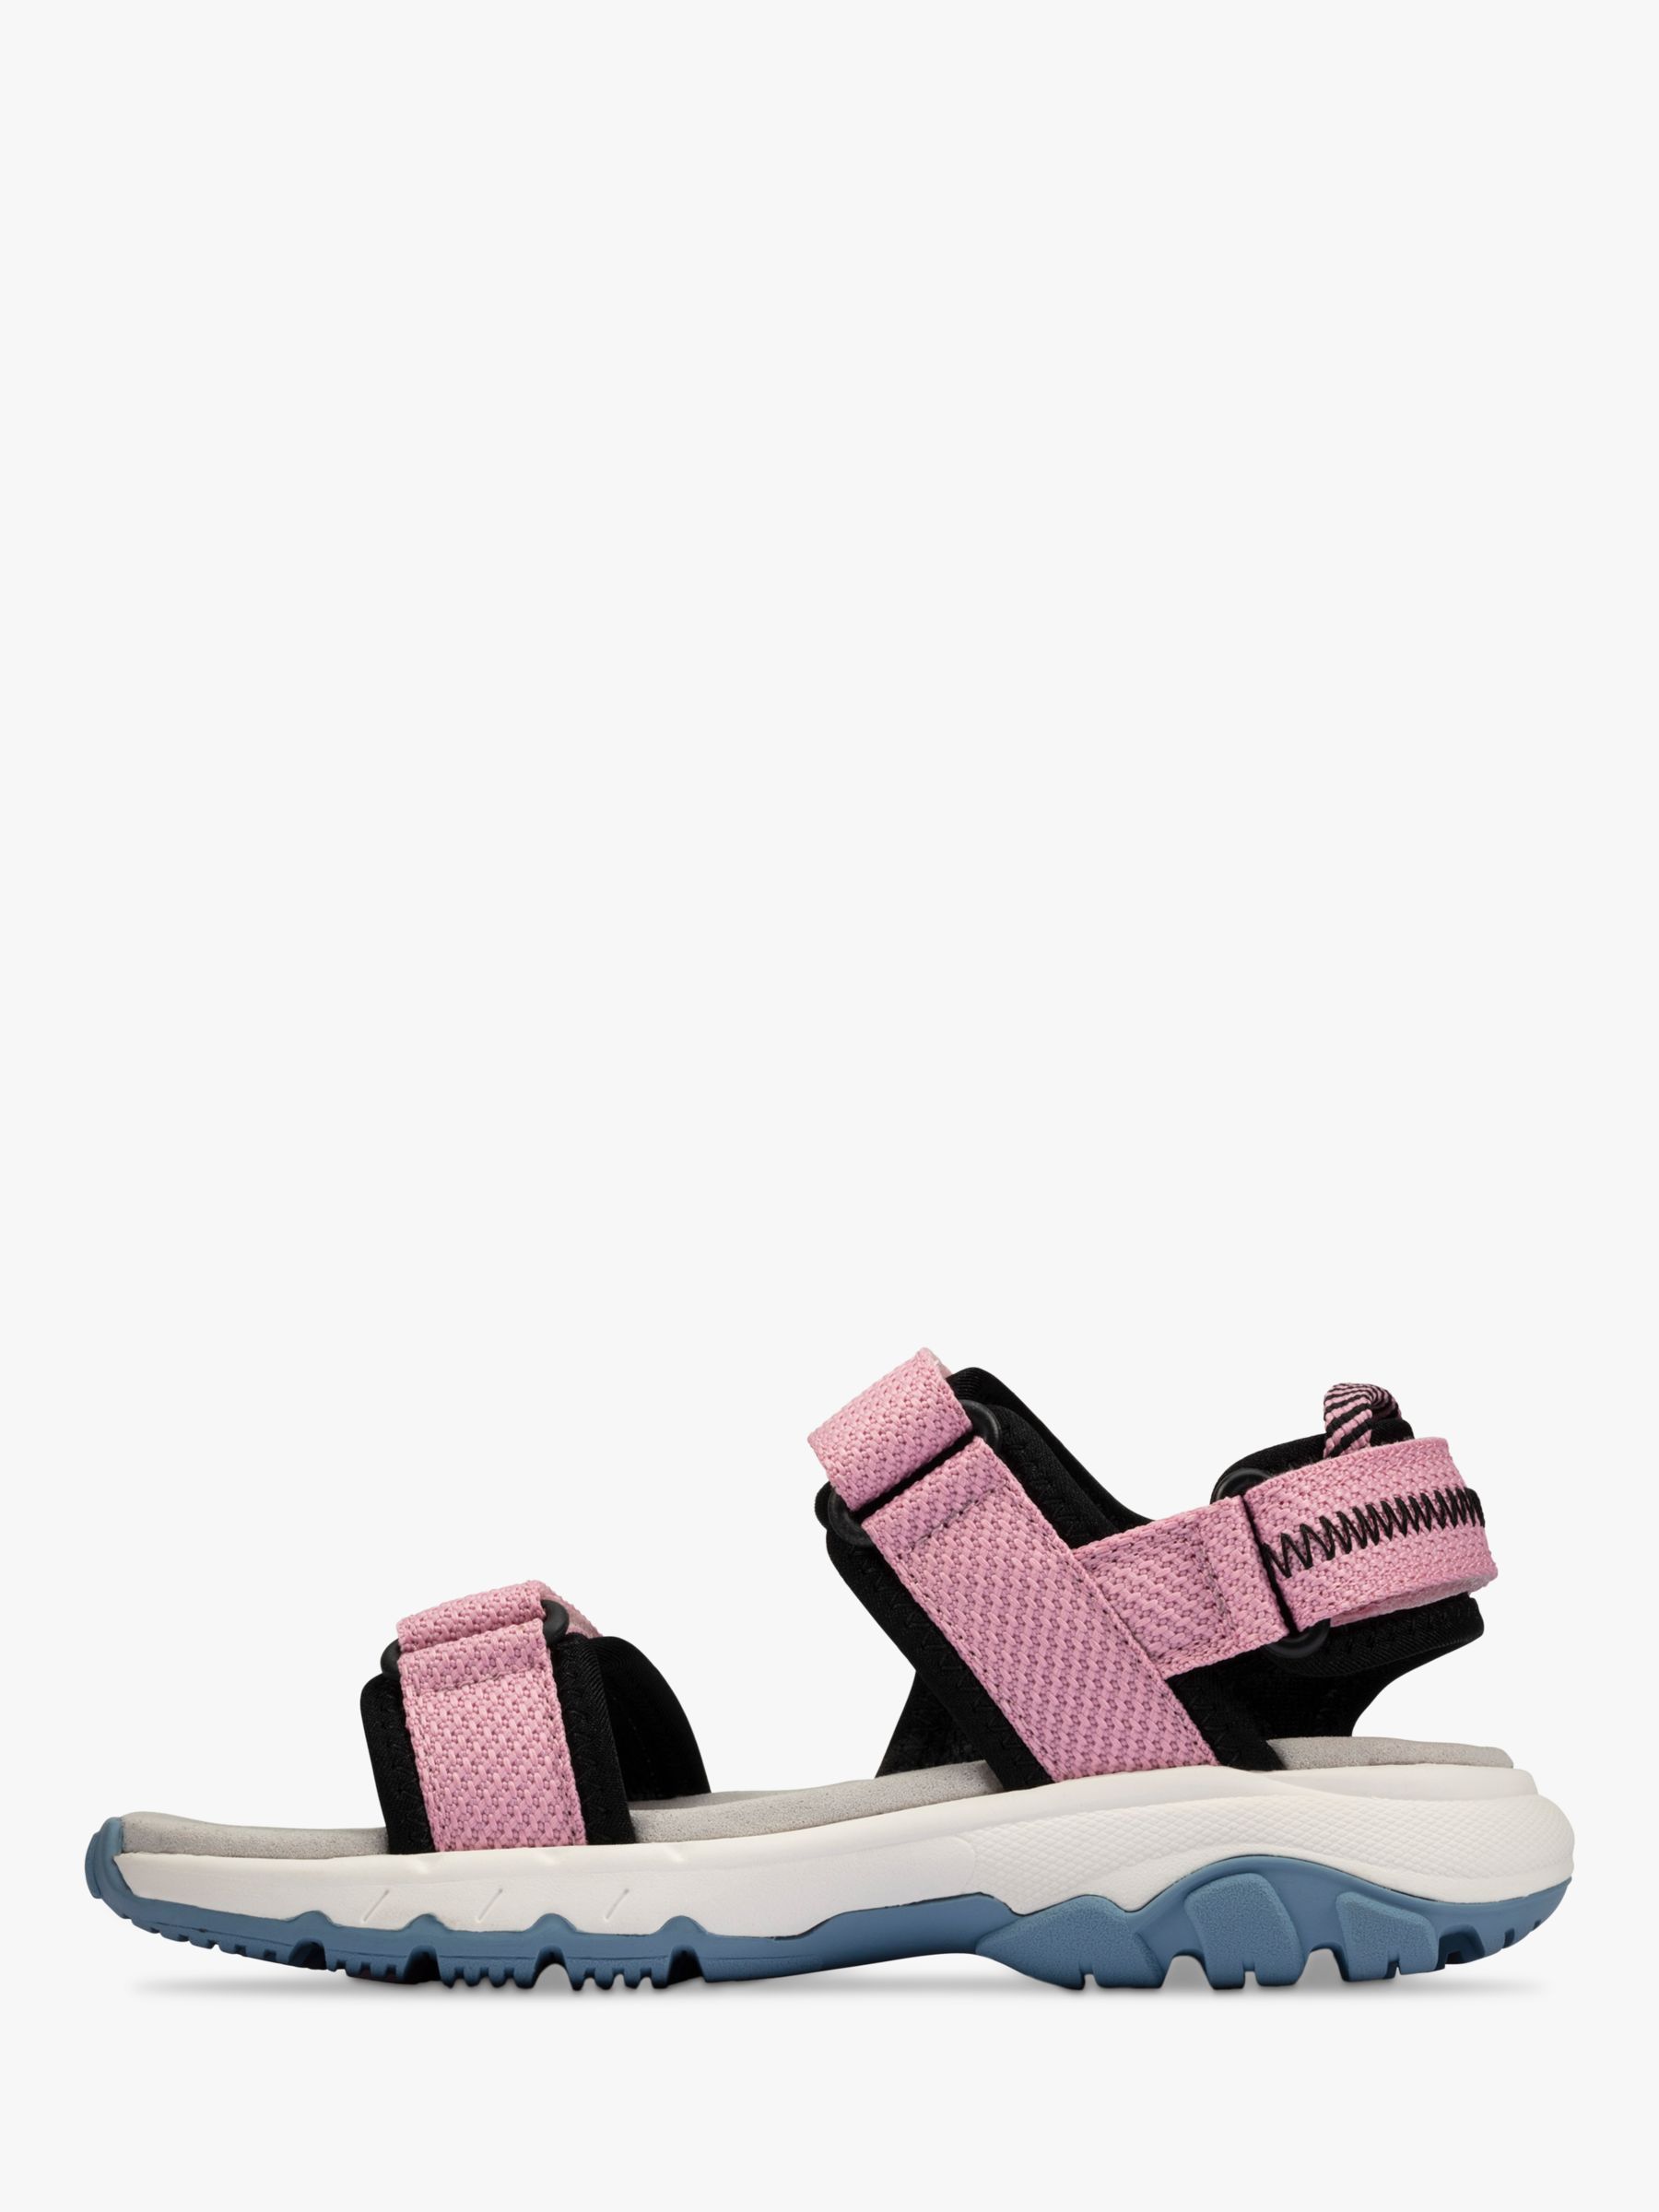 Clarks Children's Expo Sea Sandals, Pink at John Lewis & Partners